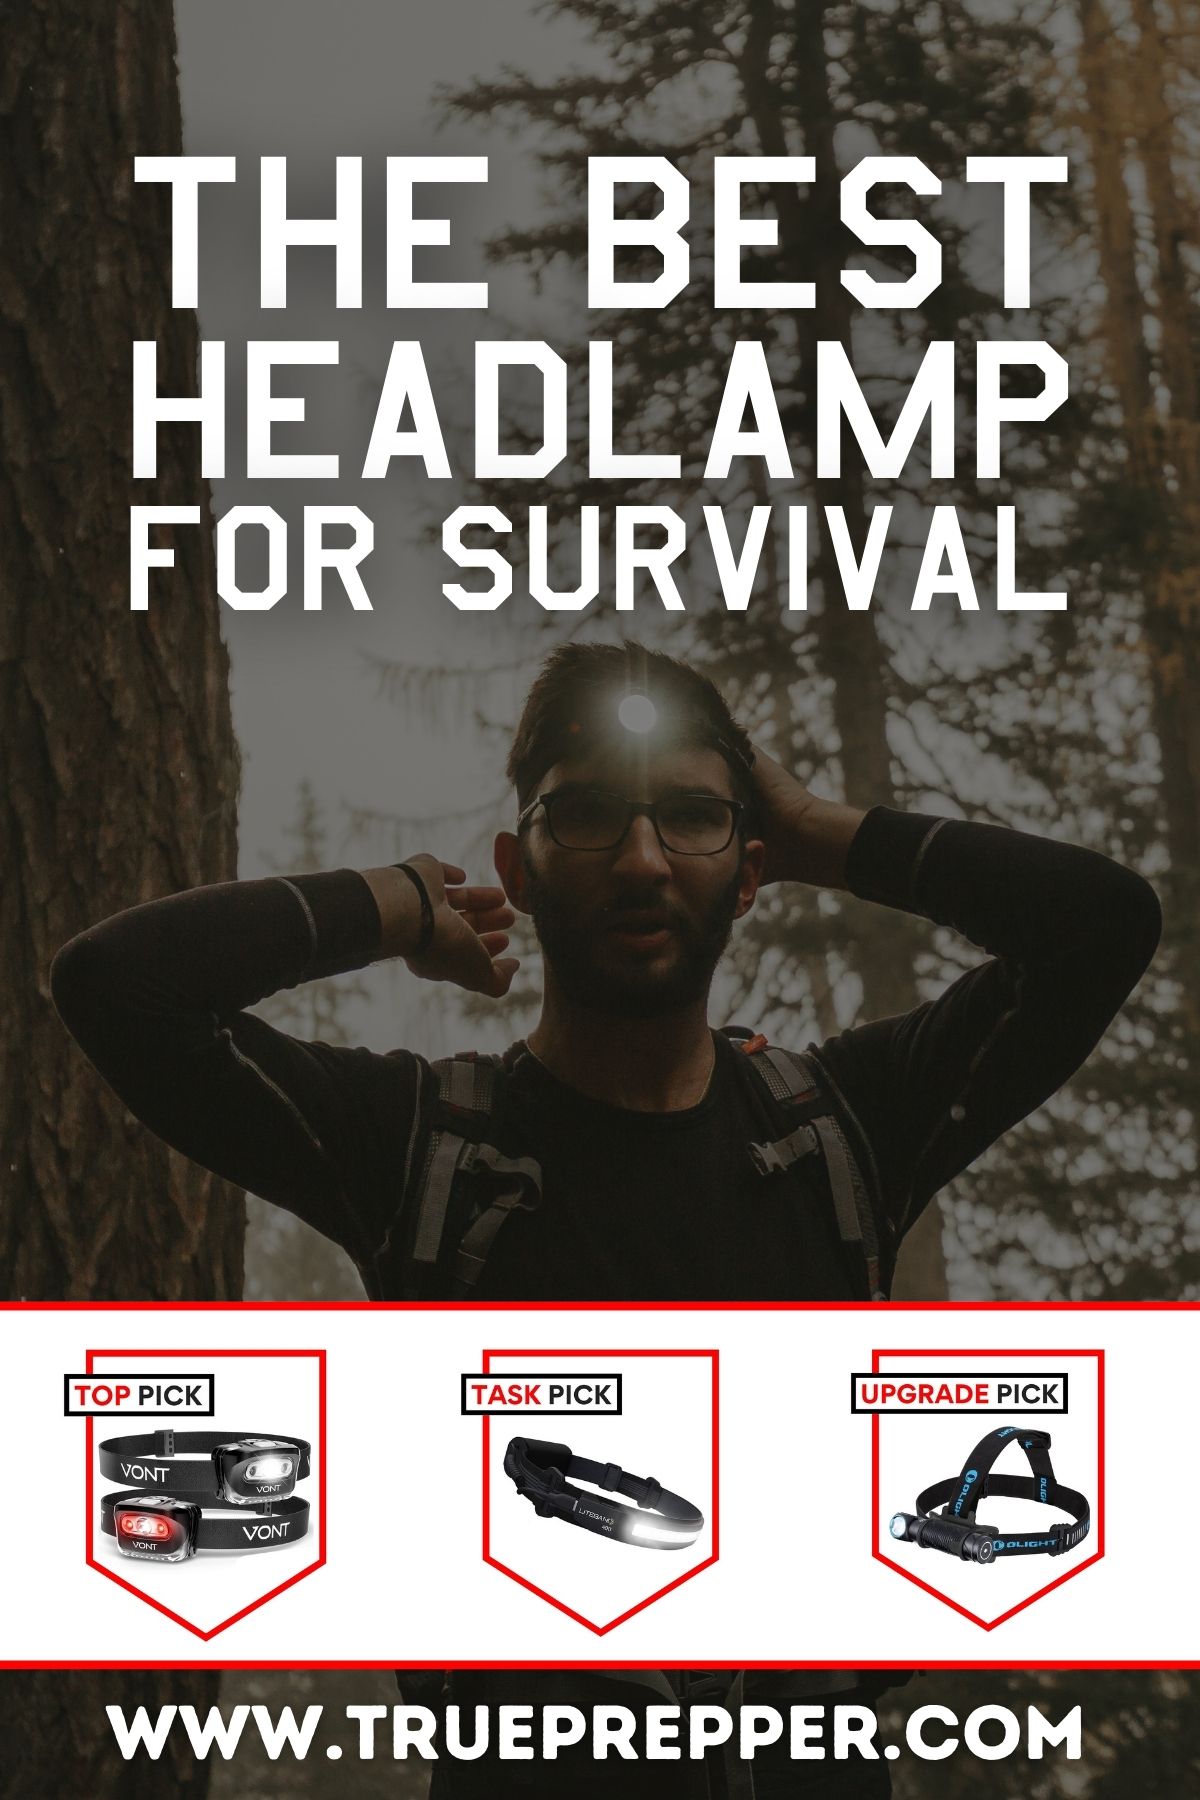 The Best Headlamp for Survival and Prepping